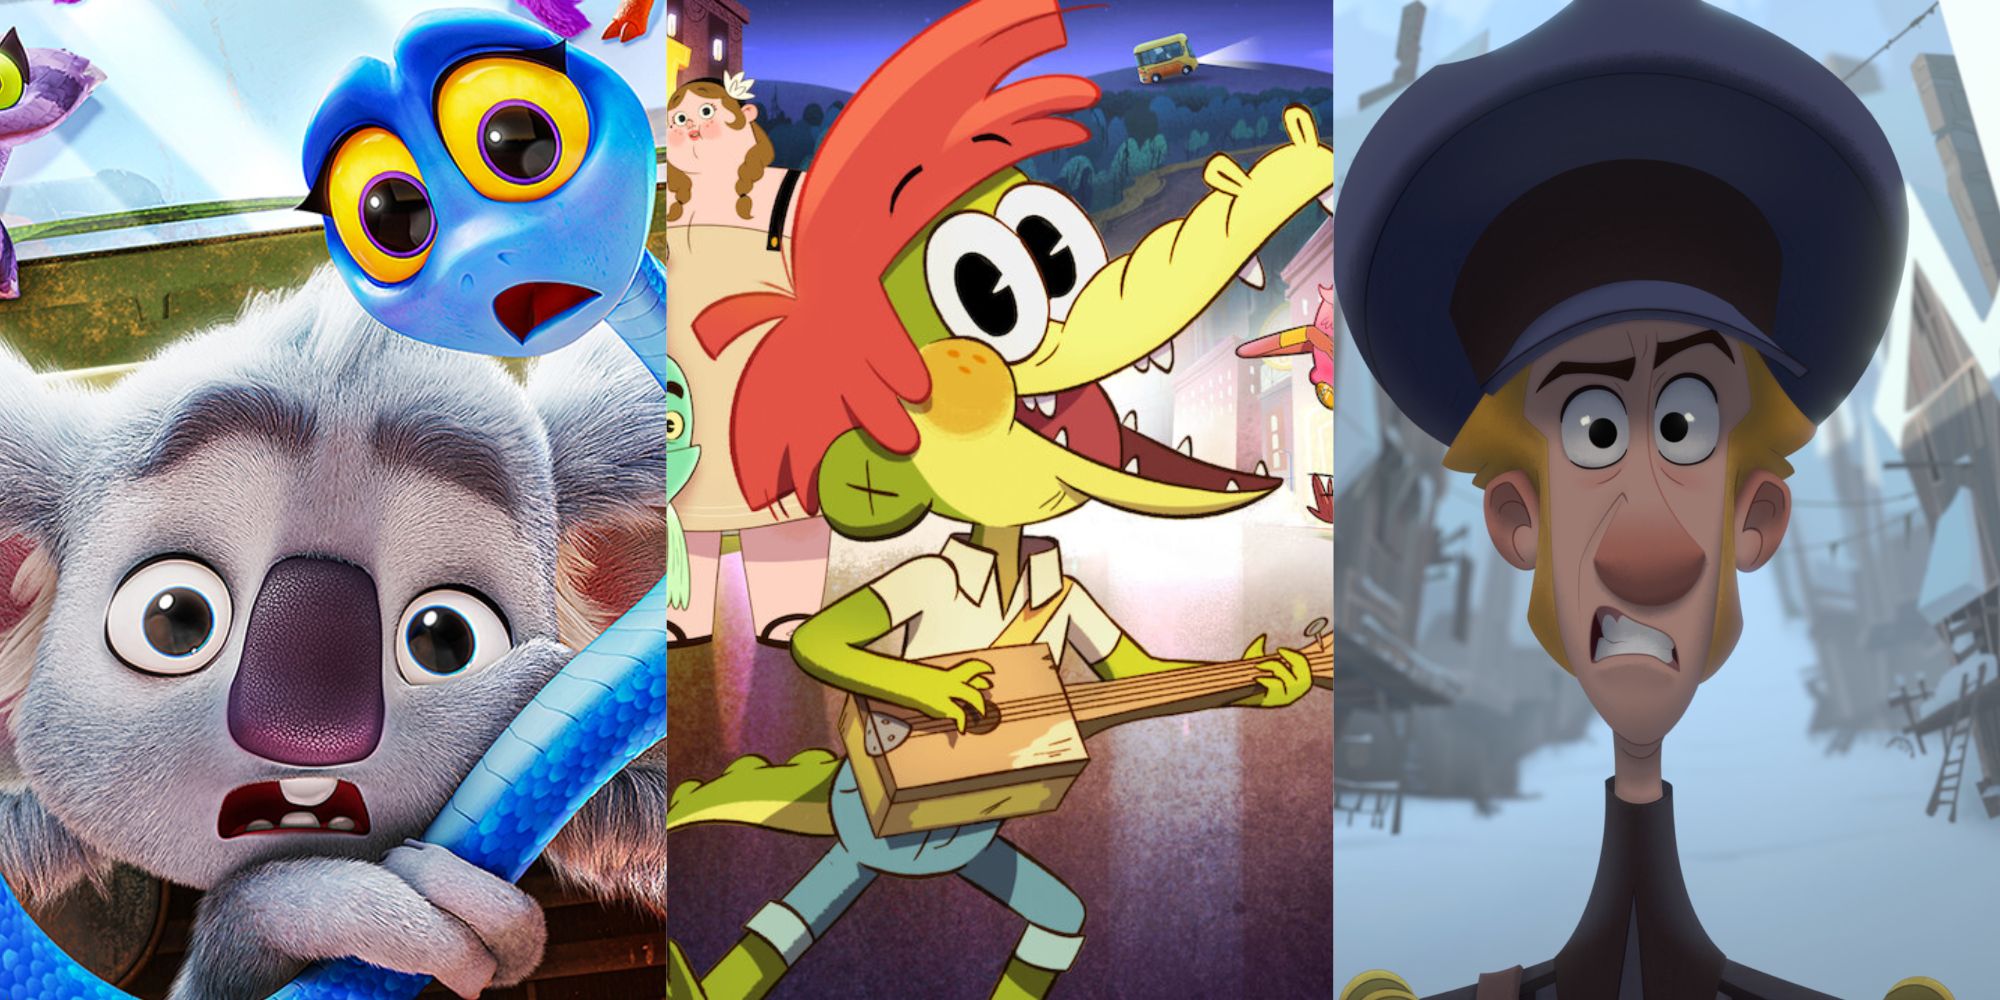 The 10 Best Netflix Original Animated Movies, According To Letterboxd